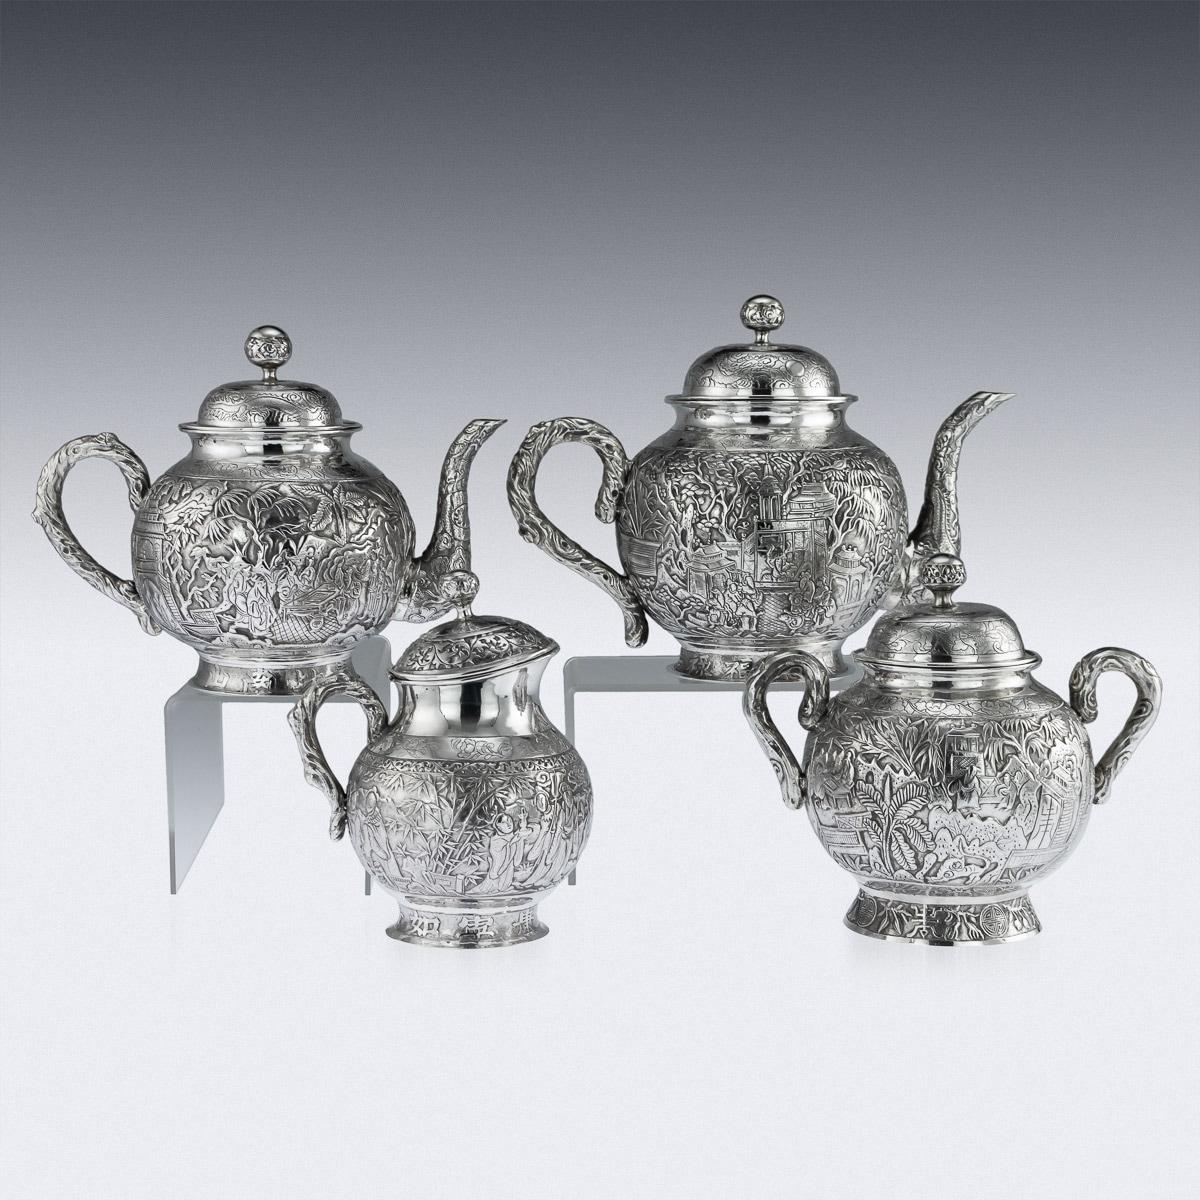 Chinese Export 19th Century Chinese Exceptional Solid Silver Tea Service, Hong Kong, circa 1890